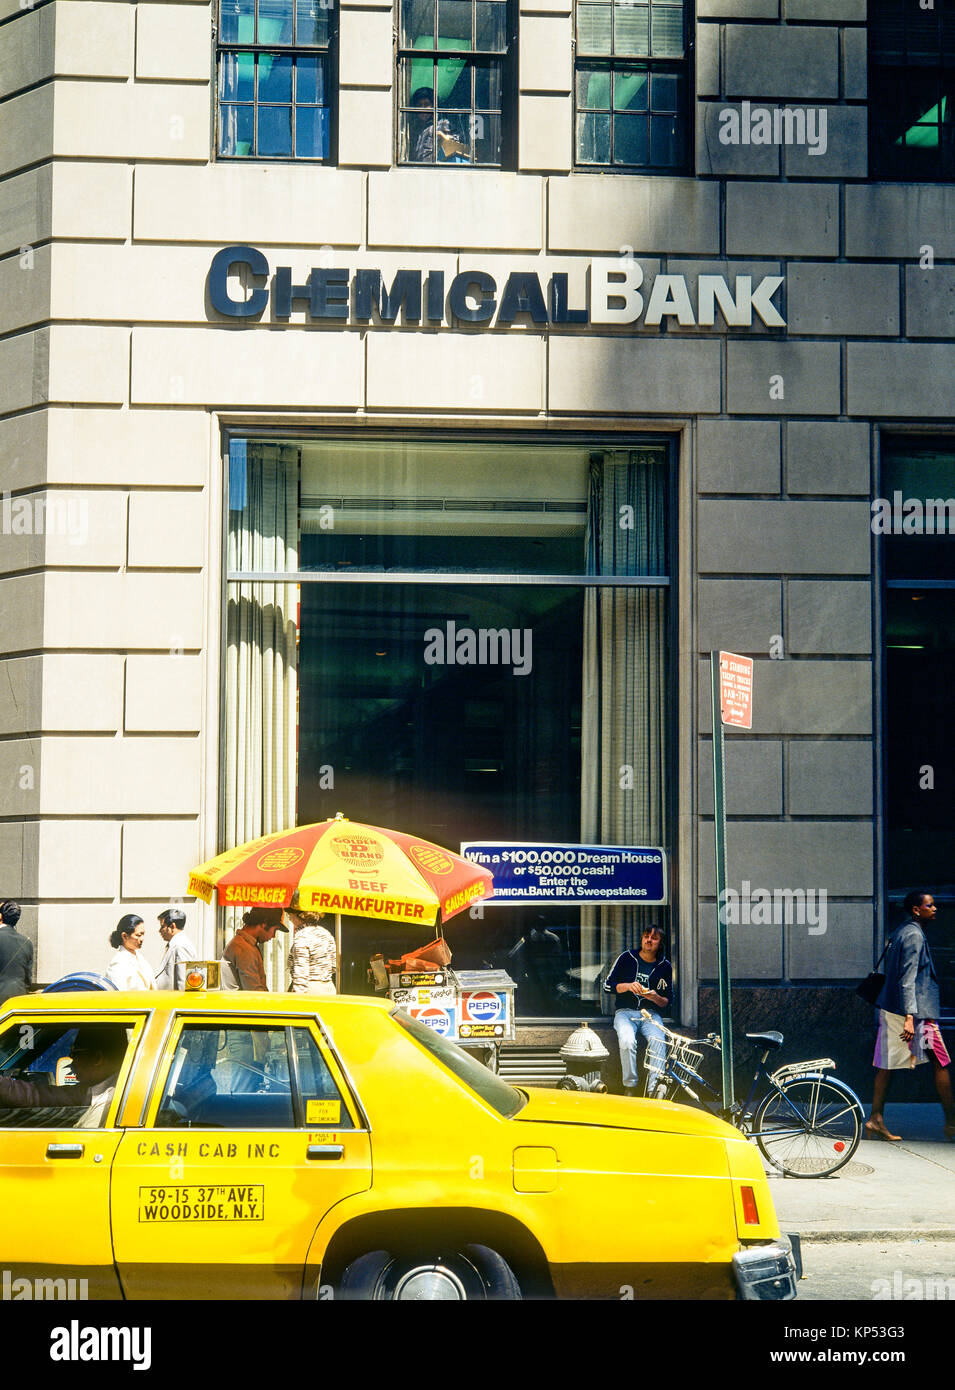 May 1982,New York,yellow cab,people,Chemical bank branch office,Manhattan,New york City,NY,NYC,USA, Stock Photo